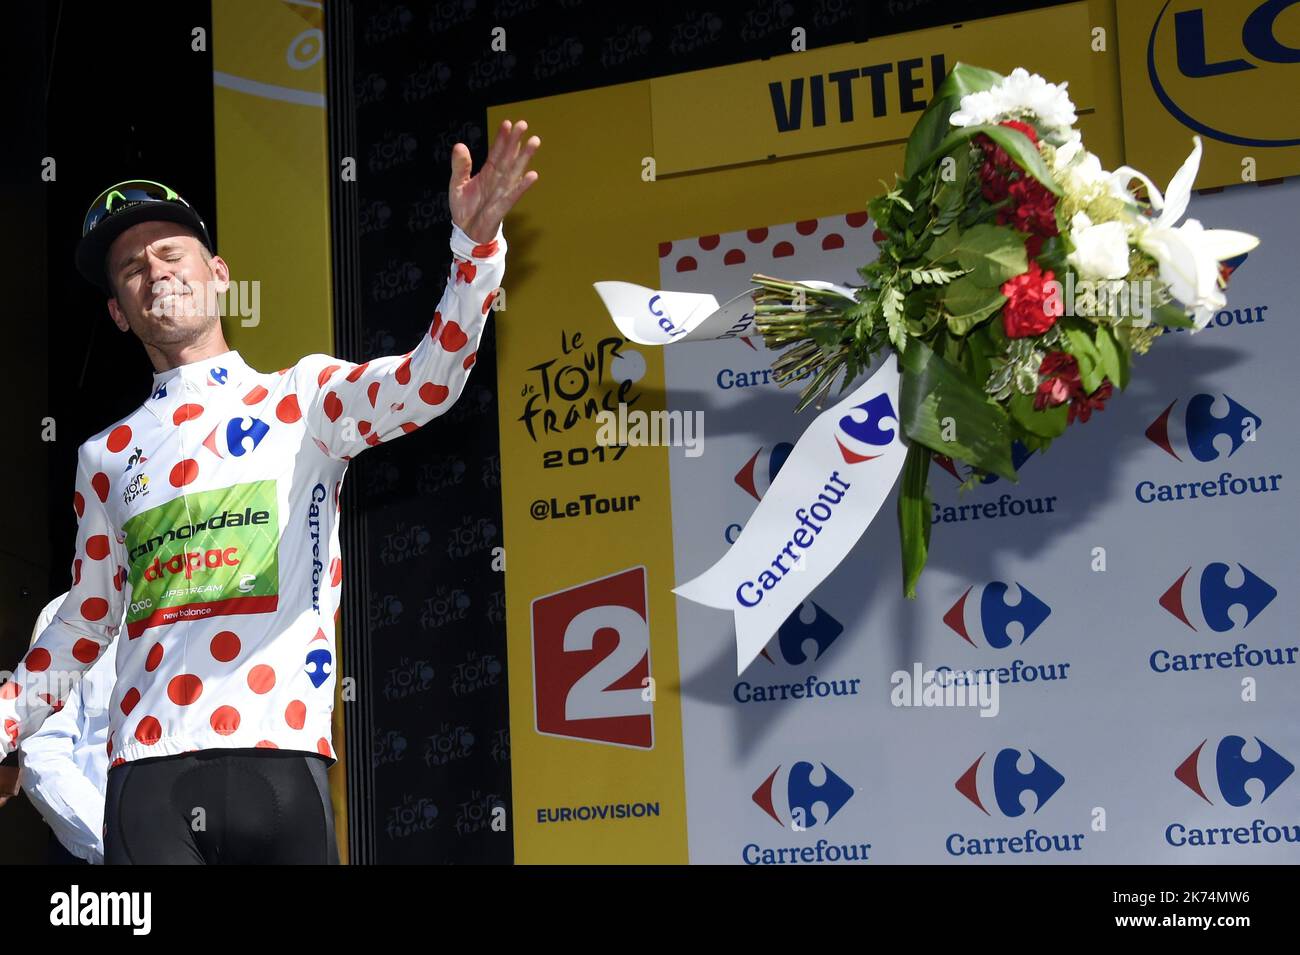 Nathan BROWN conserve son maillot Blanc à Pois Rouges et jette son bouquet de fleurs au public. PHOTO Alexandre MARCHI.   Running from Saturday July 1st to Sunday July 23rd 2017, the 104th Tour de France is  made up of 21 stages and cover a total distance of 3,540 kilometres. Stock Photo